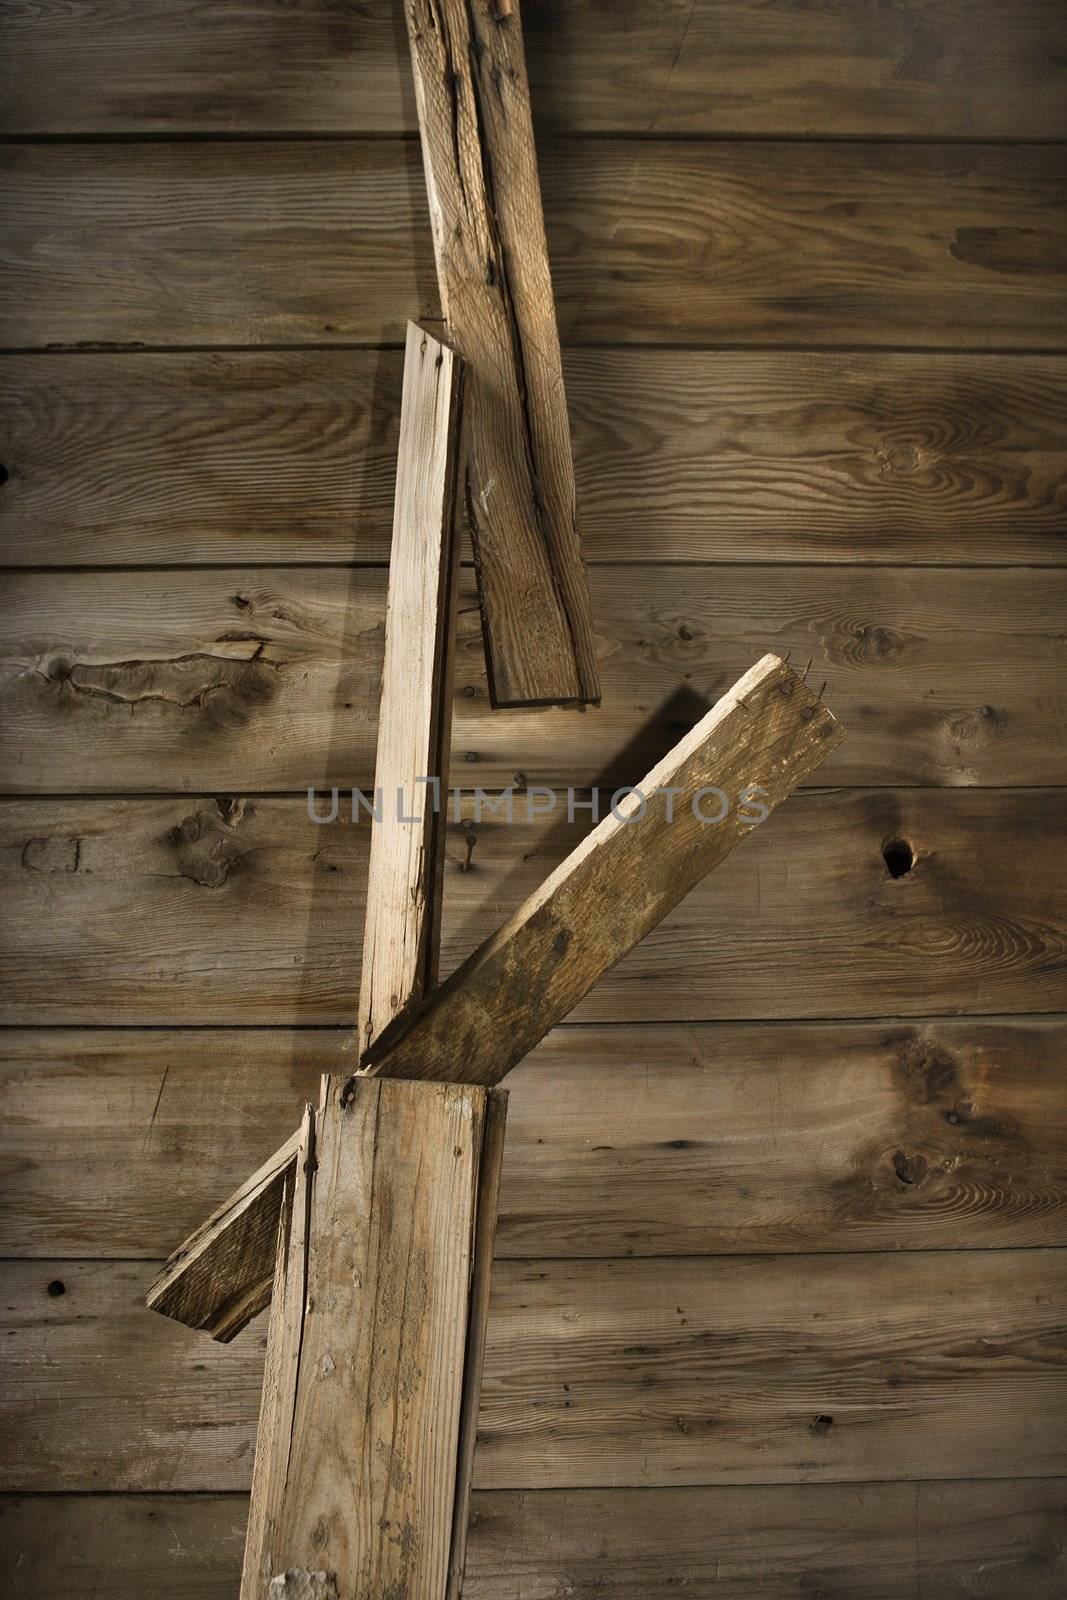 Close up detail of side of rustic wooden building with wood pieces hanging down.